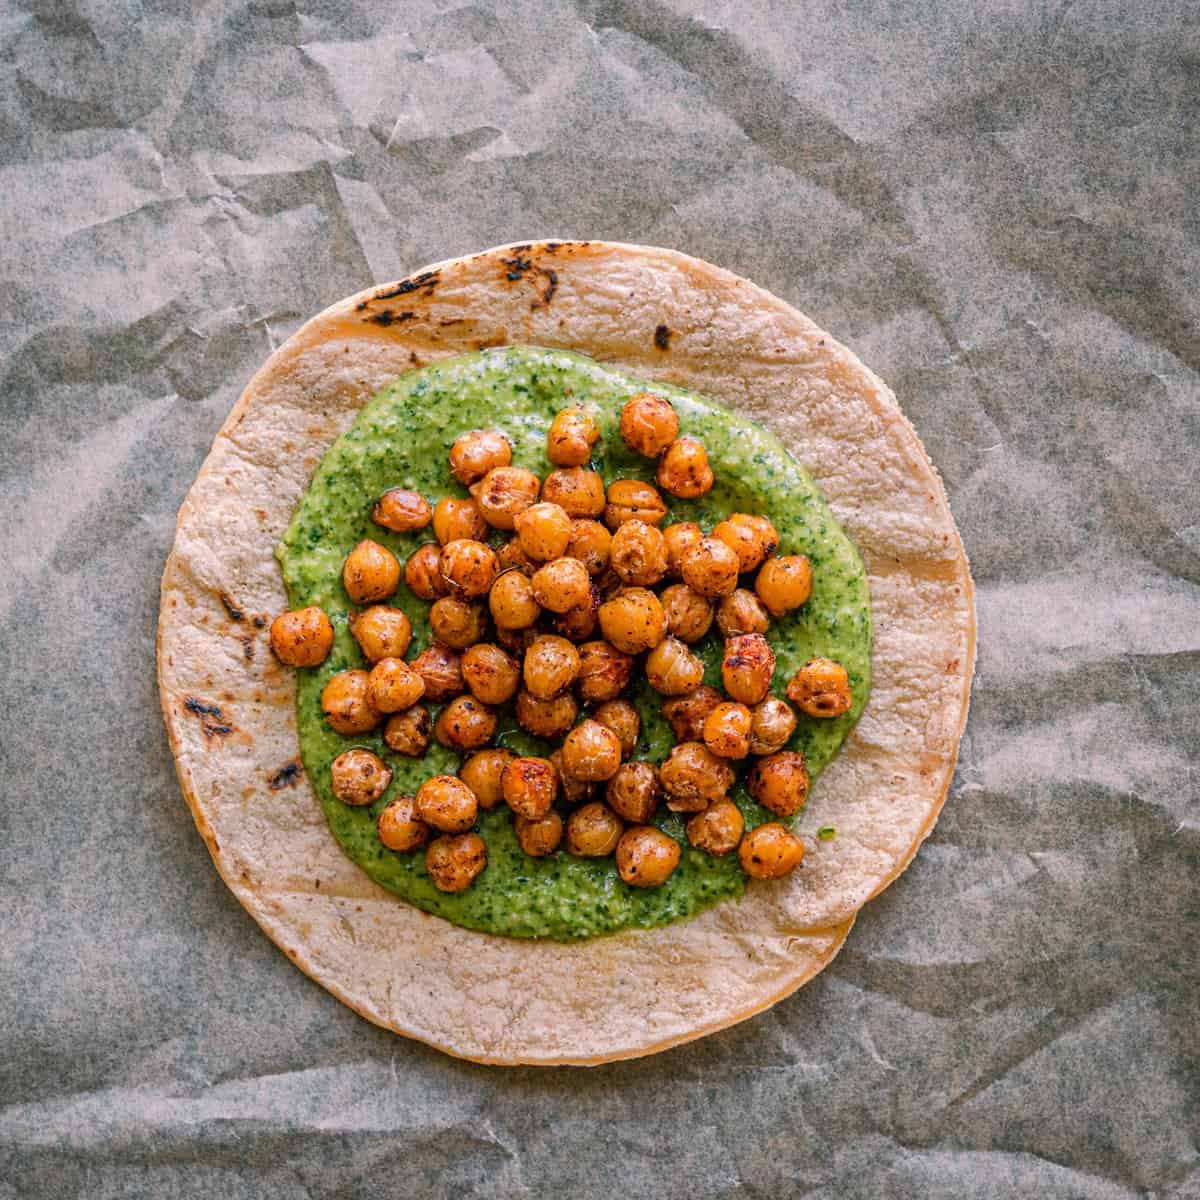 assembling tacos - charred corn tortilla with cilantro pesto and spiced chickpeas on top